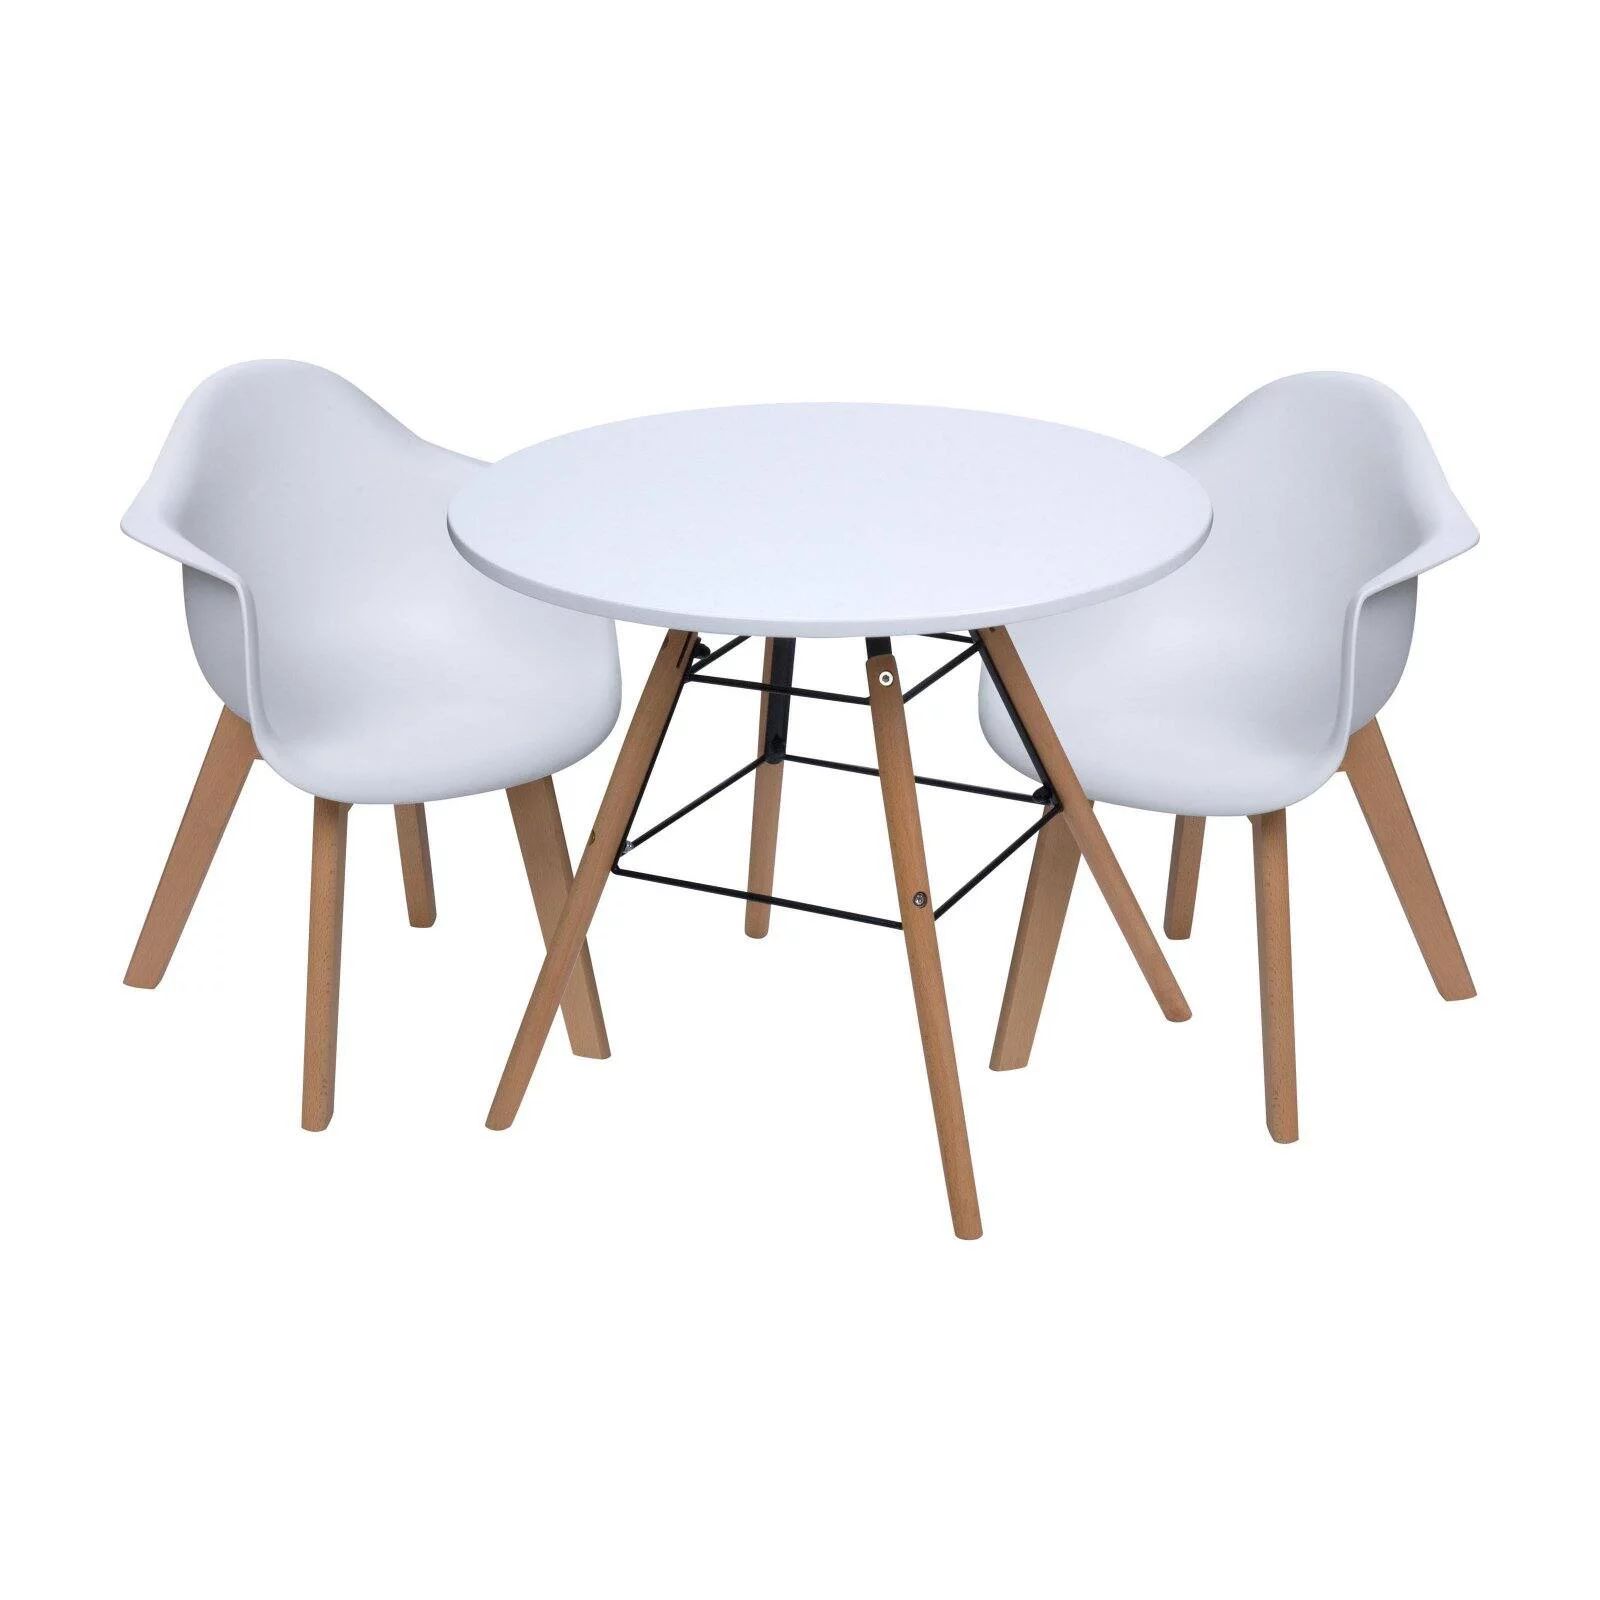 Gift Mark Mid-Century Modern Round Kids Table with White Arm Chairs | Walmart (US)